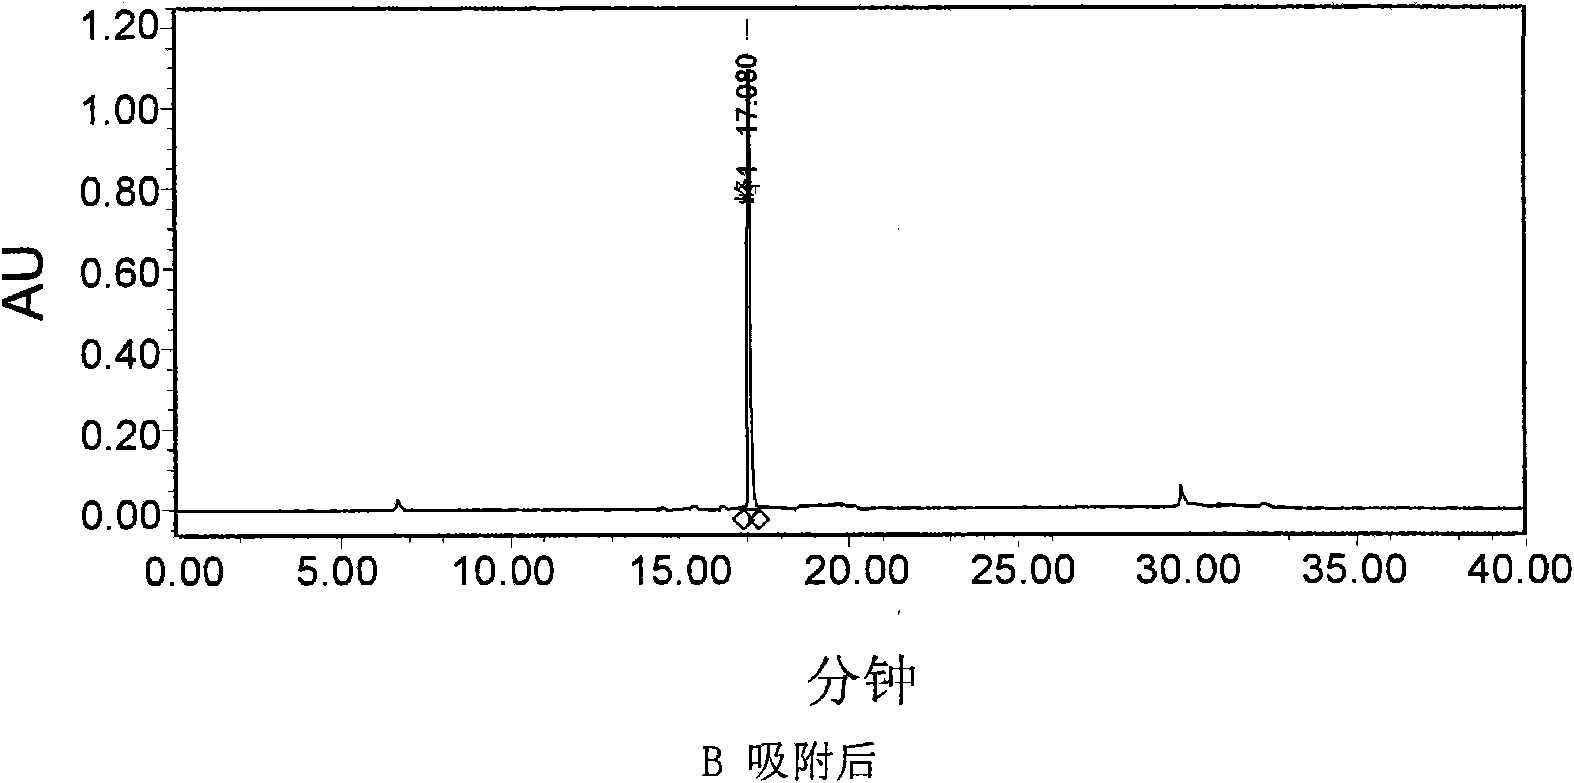 Preparation of attapulgite selectively absorbing tannin